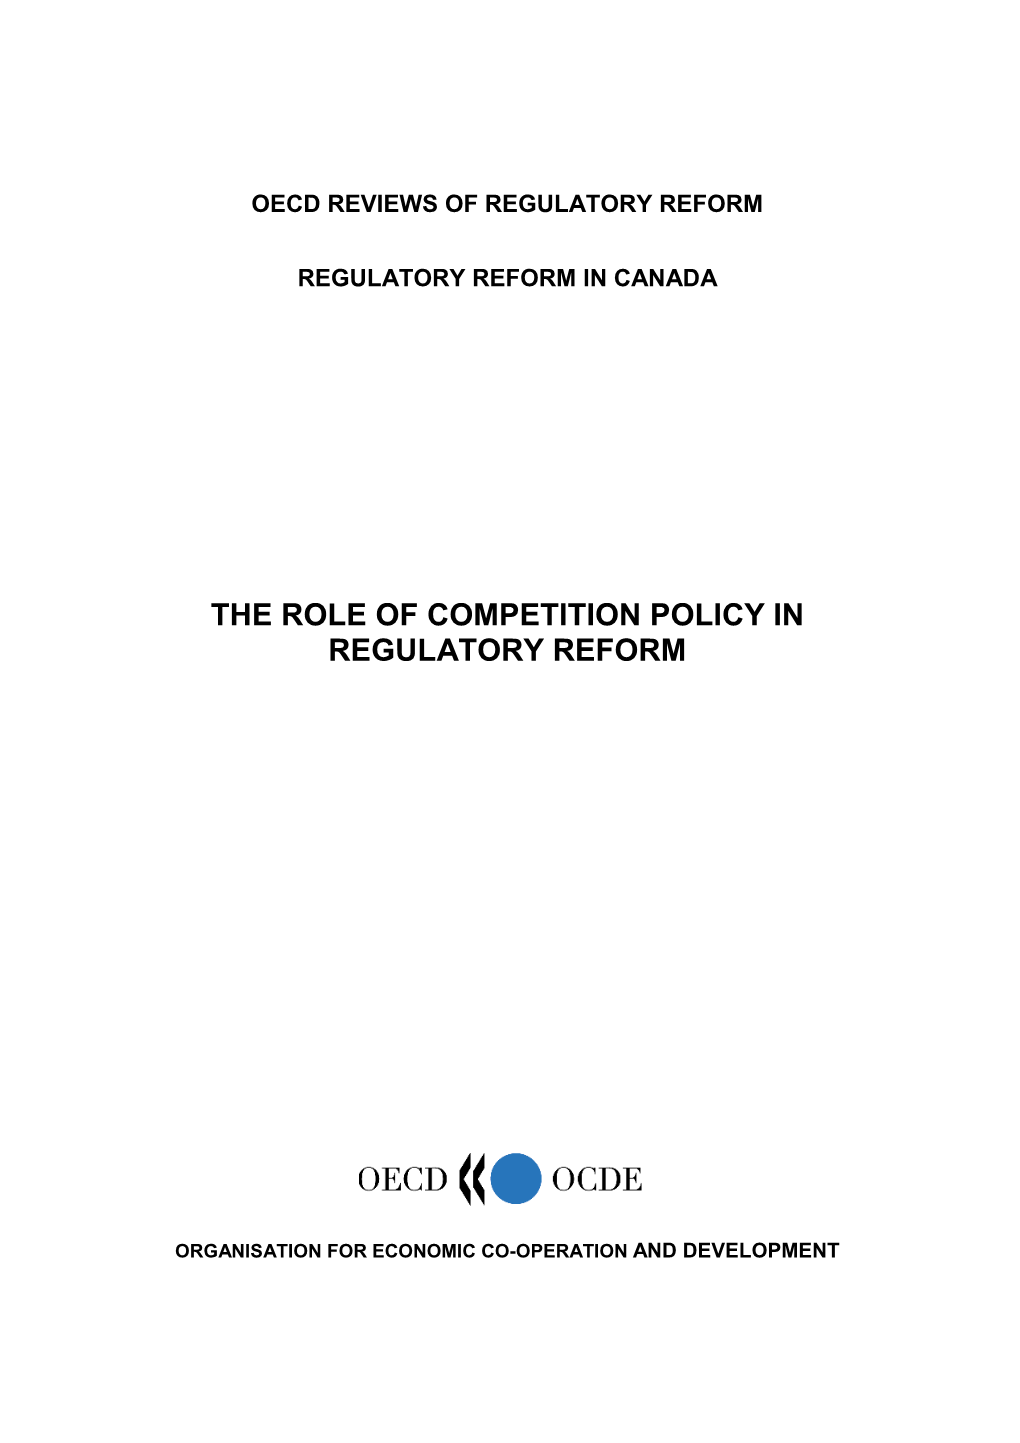 The Role of Competition Policy in Regulatory Reform